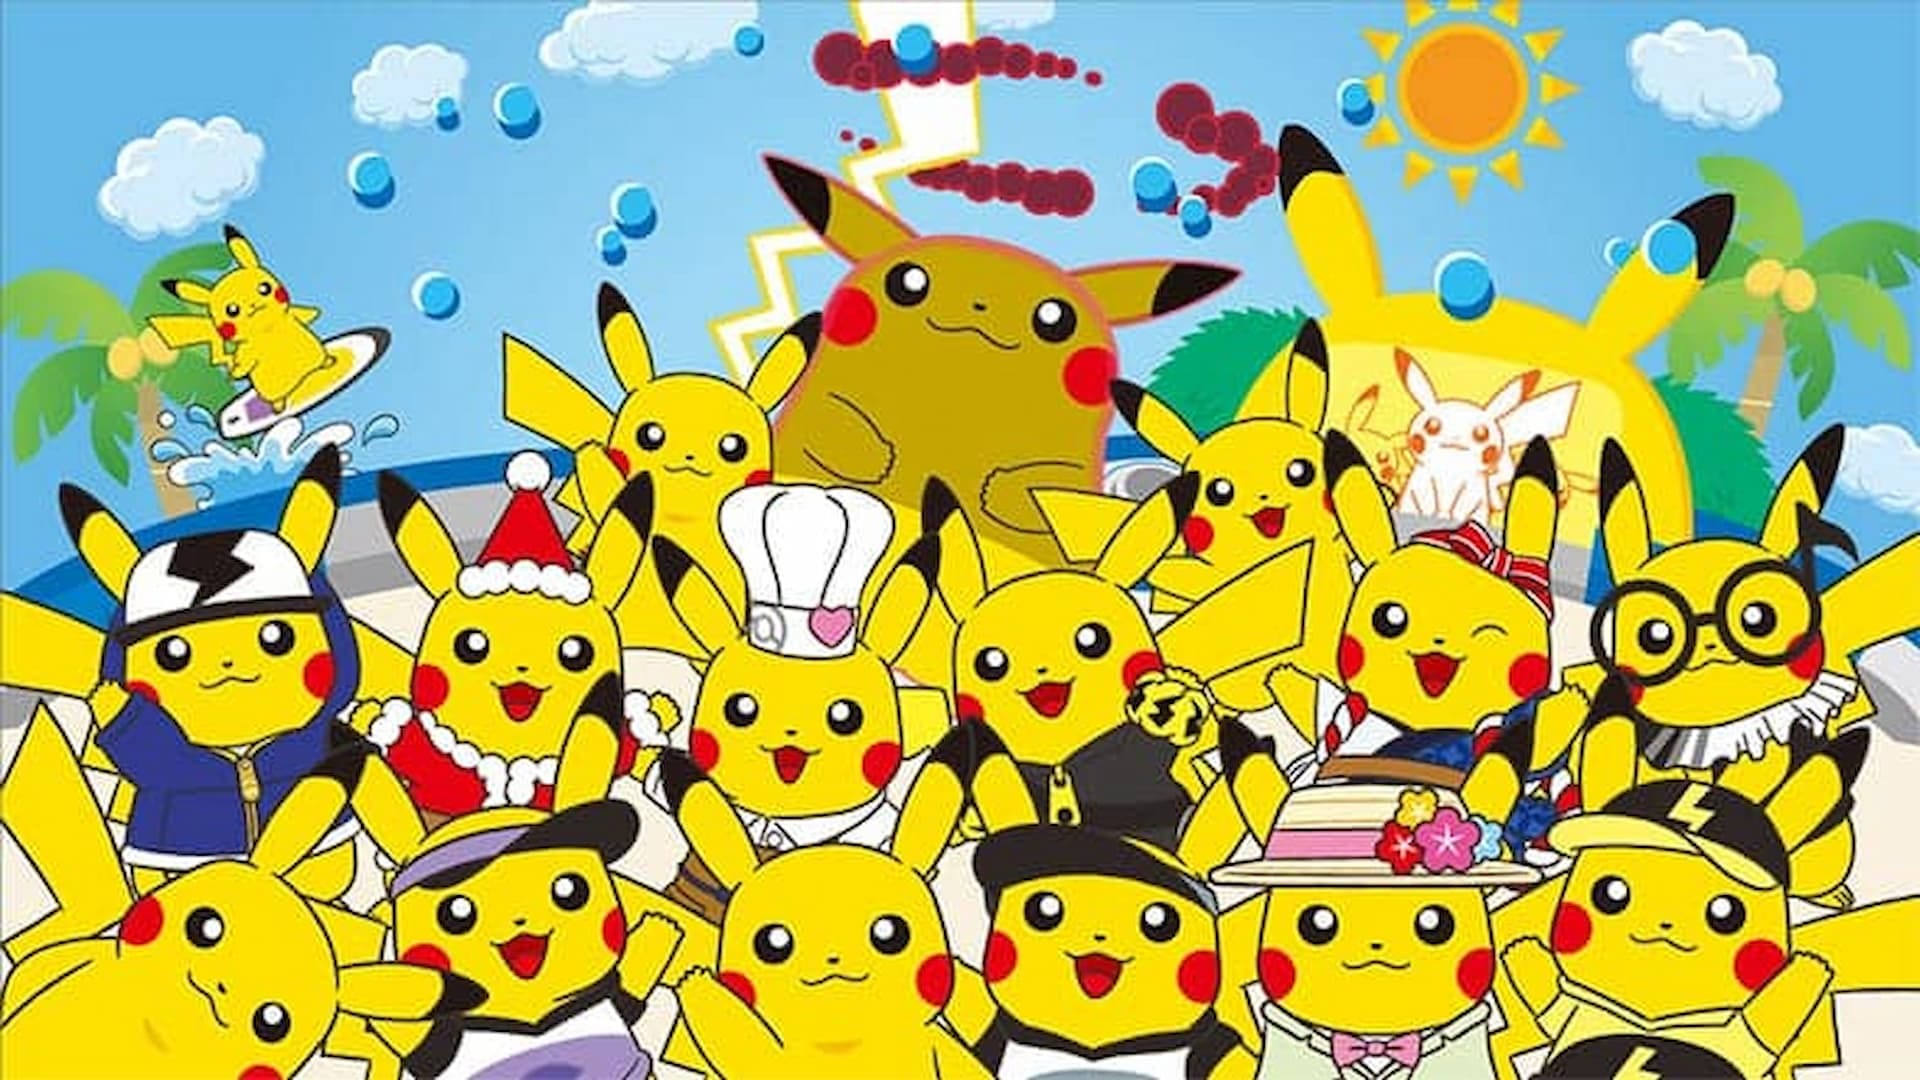 Fat Pikachu and other giant Pokemon revealed for Sword and Shield - CNET